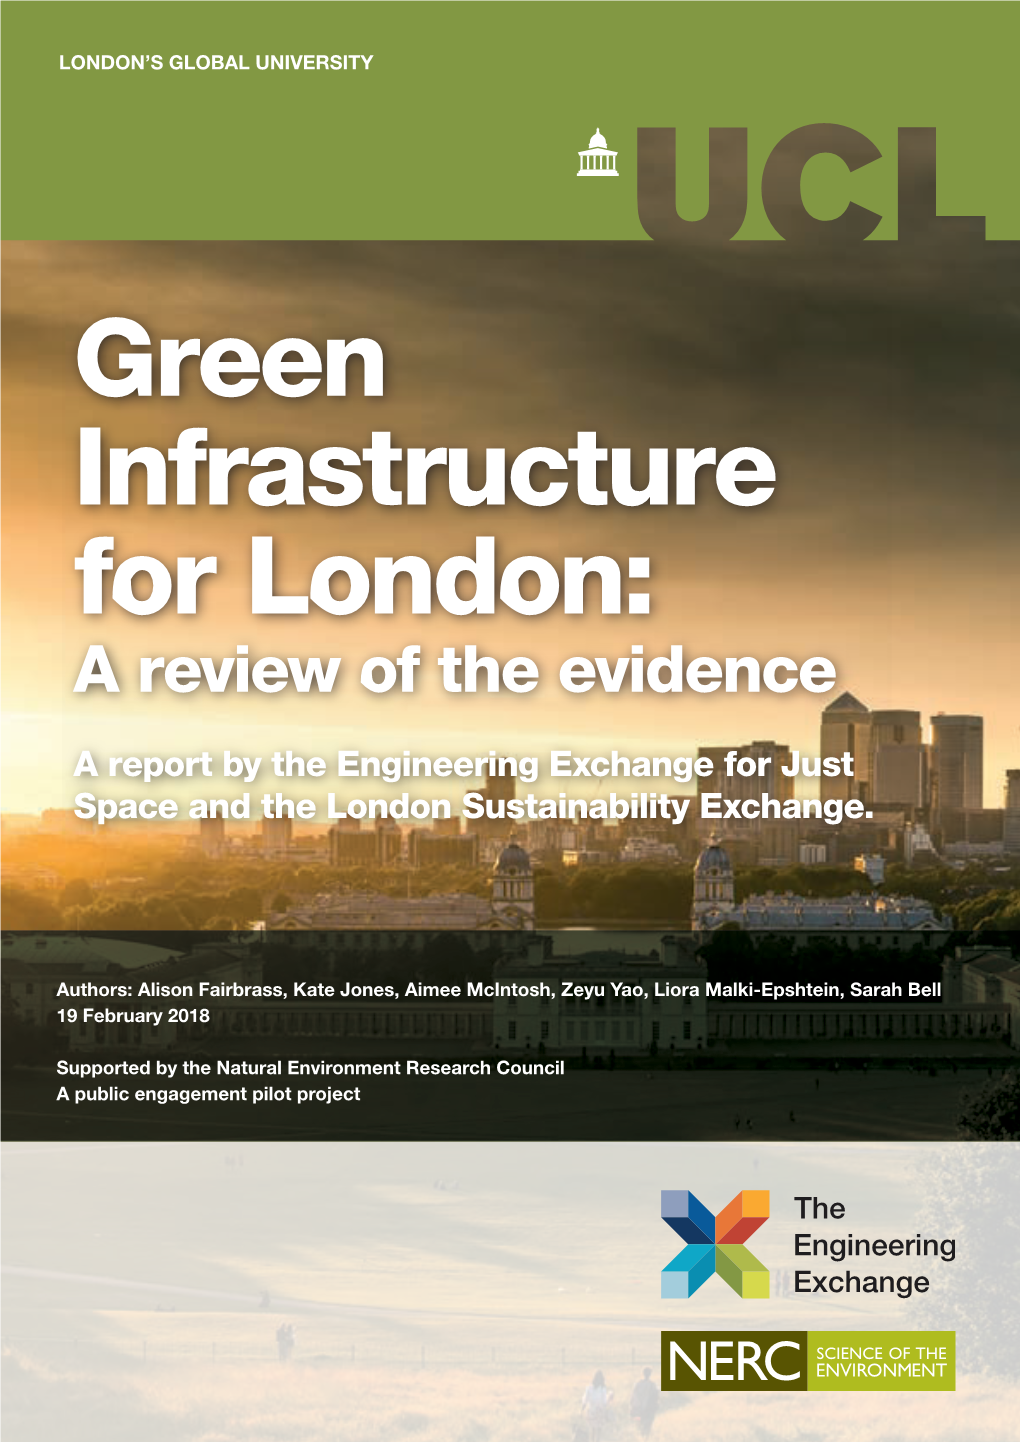 Green Infrastructure for London: a Review of the Evidence